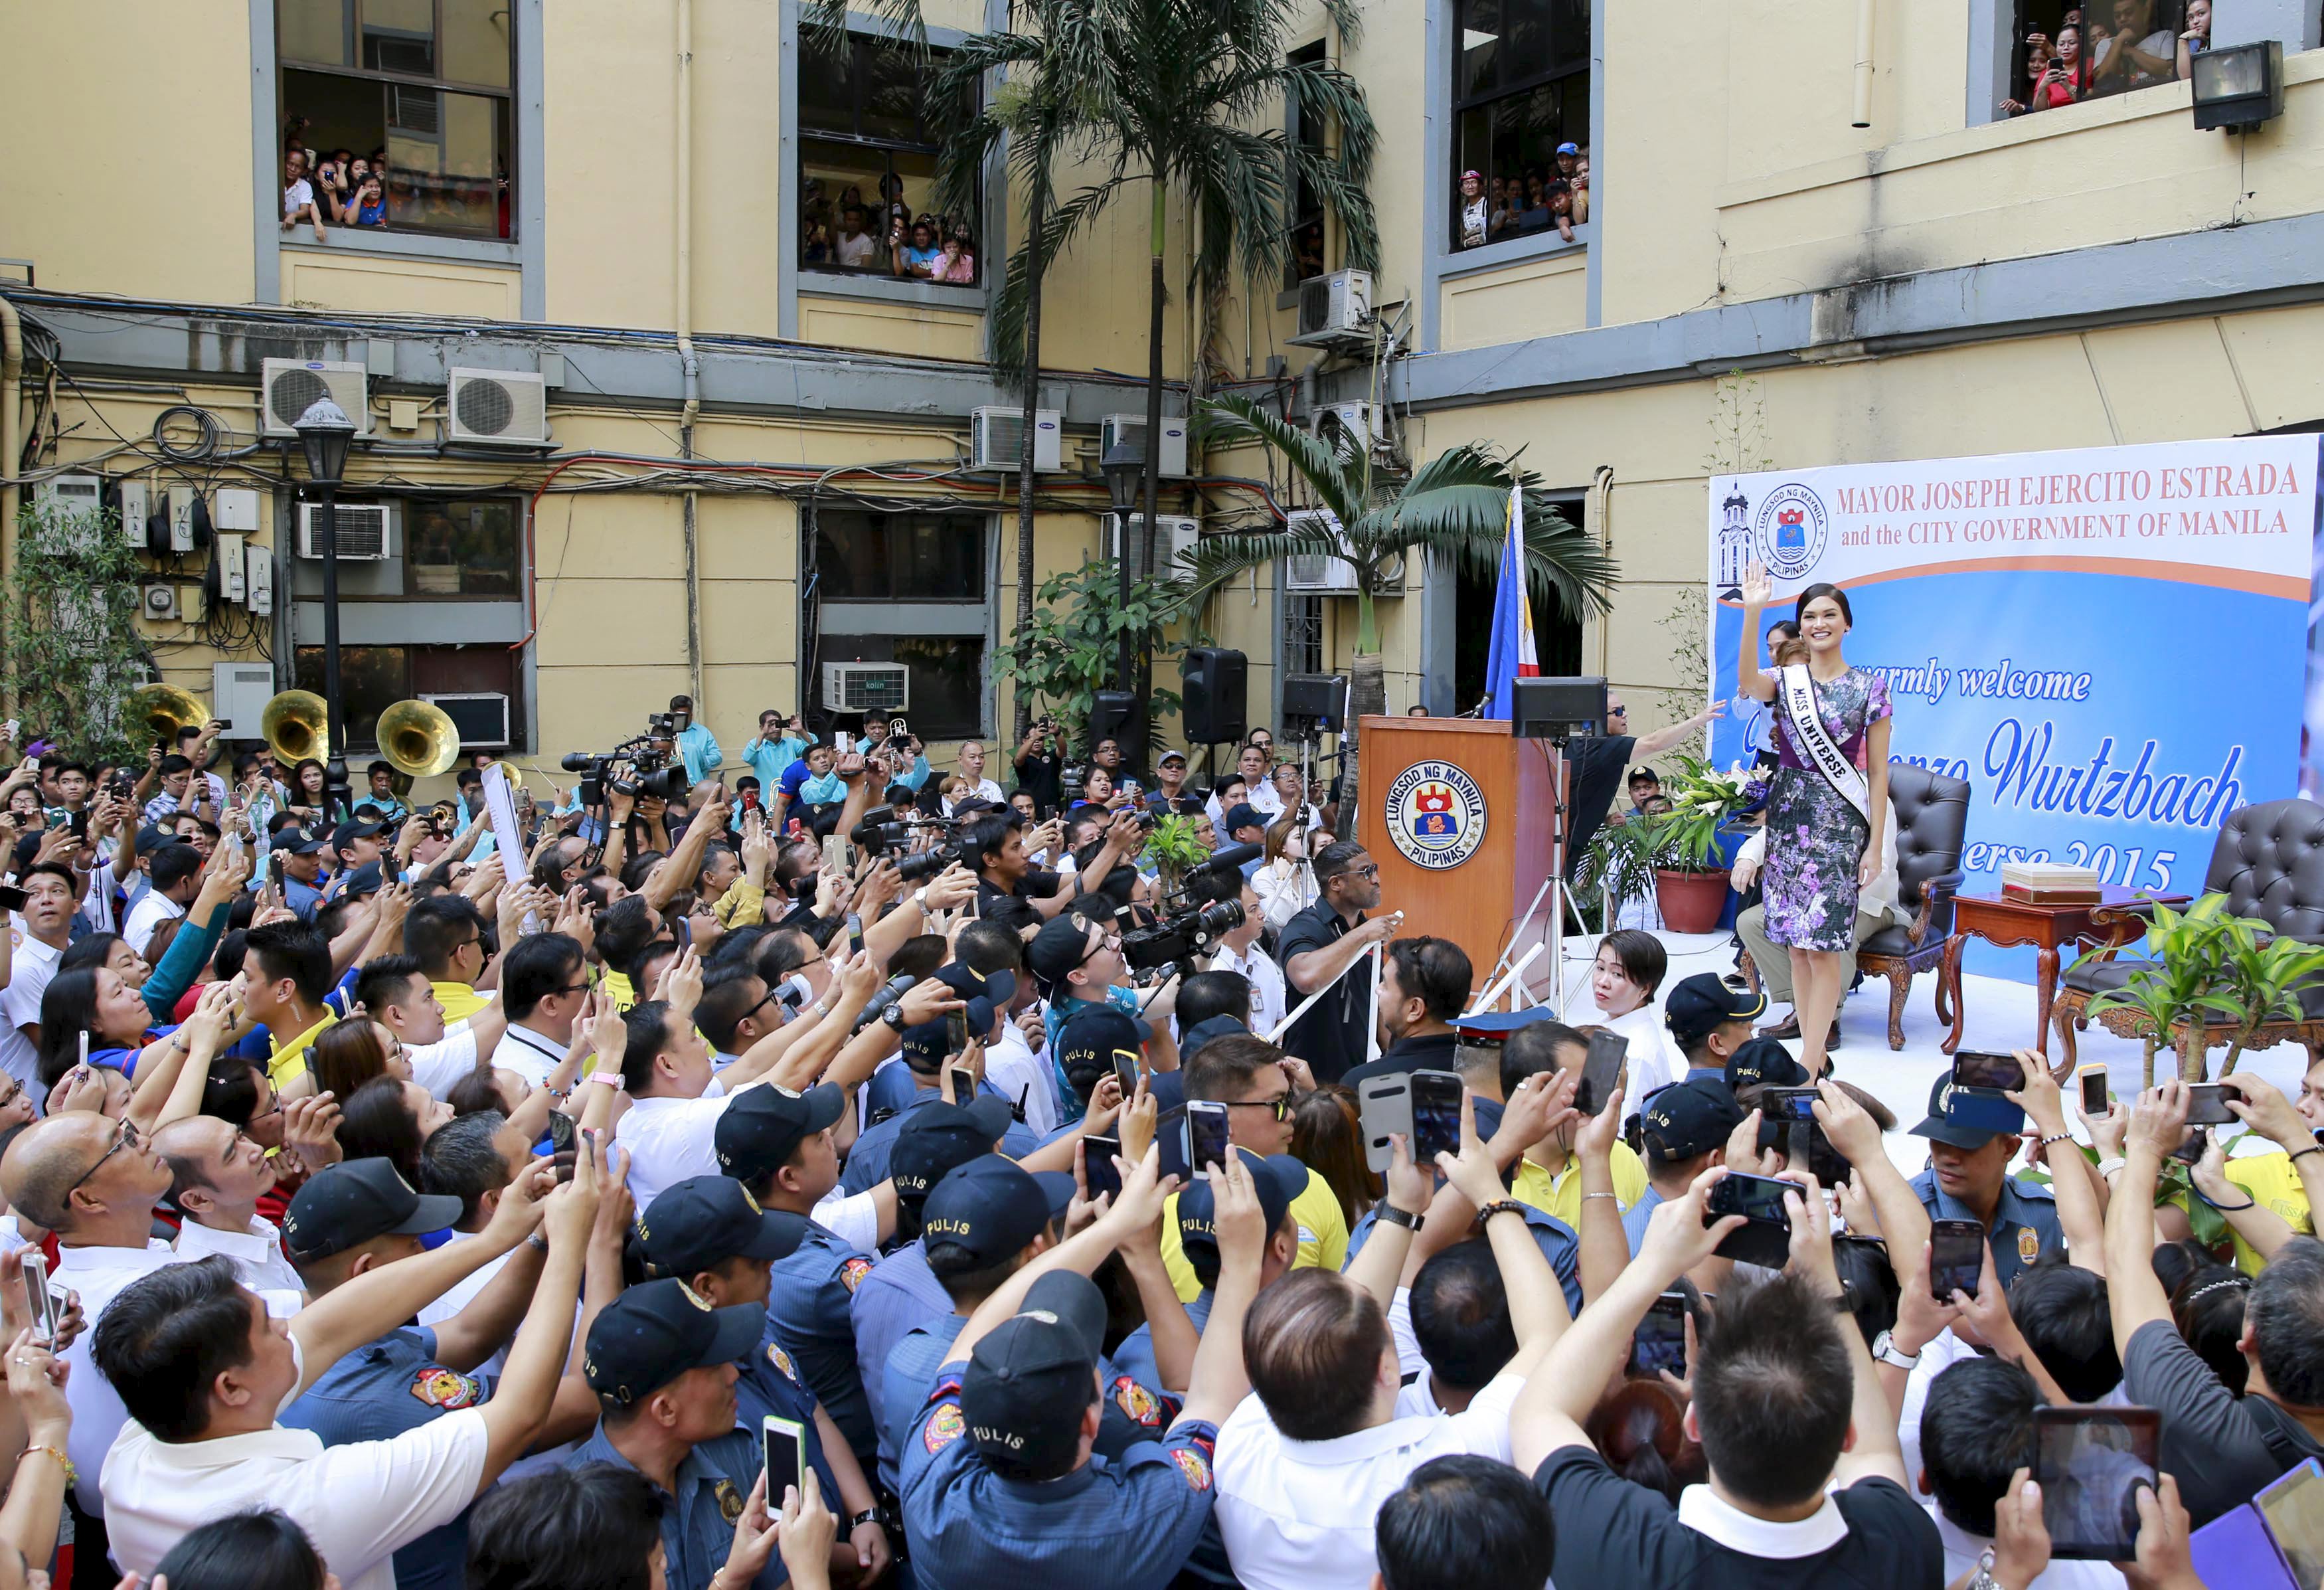 Miss Universe 2015 Pia Alonzo Wurtzbach waves to the crowds during her visit at the city hall of Manila January 25, 2016. Wurtzbach, the first Miss Universe from the Philippines in more than four decades, said on Sunday she will spend her reign bringing awareness to issues like HIV and draw support for countries vulnerable to disasters.  REUTERS/Romeo Ranoco